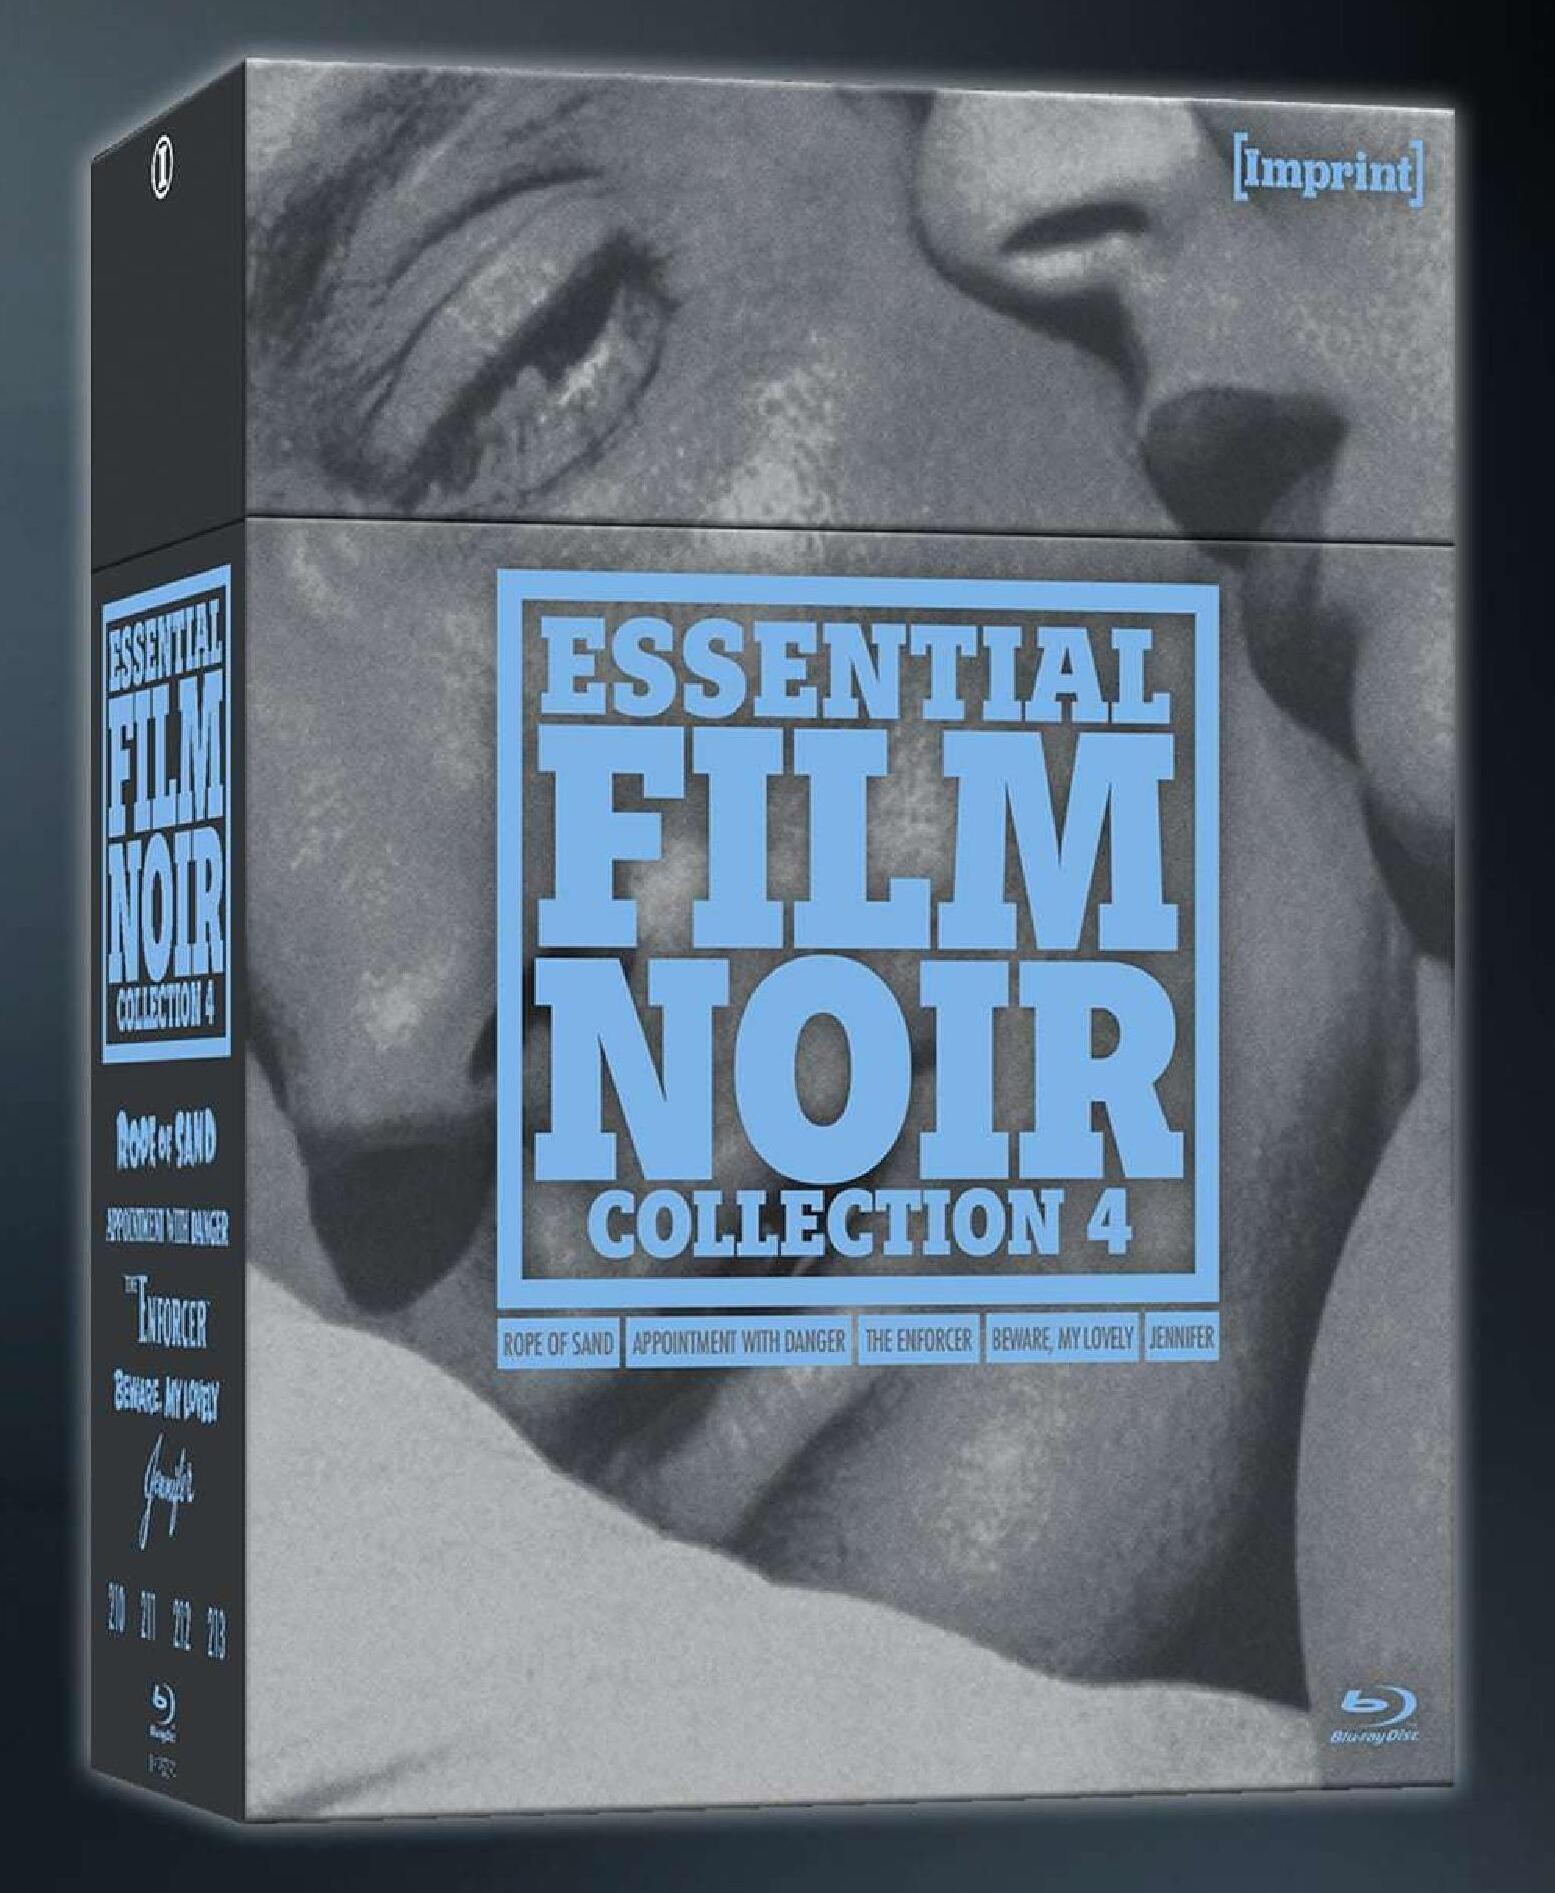 ESSENTIAL FILM NOIR COLLECTION 4 (REGION FREE IMPORT - LIMITED EDITION) BLU-RAY [SCRATCH AND DENT]